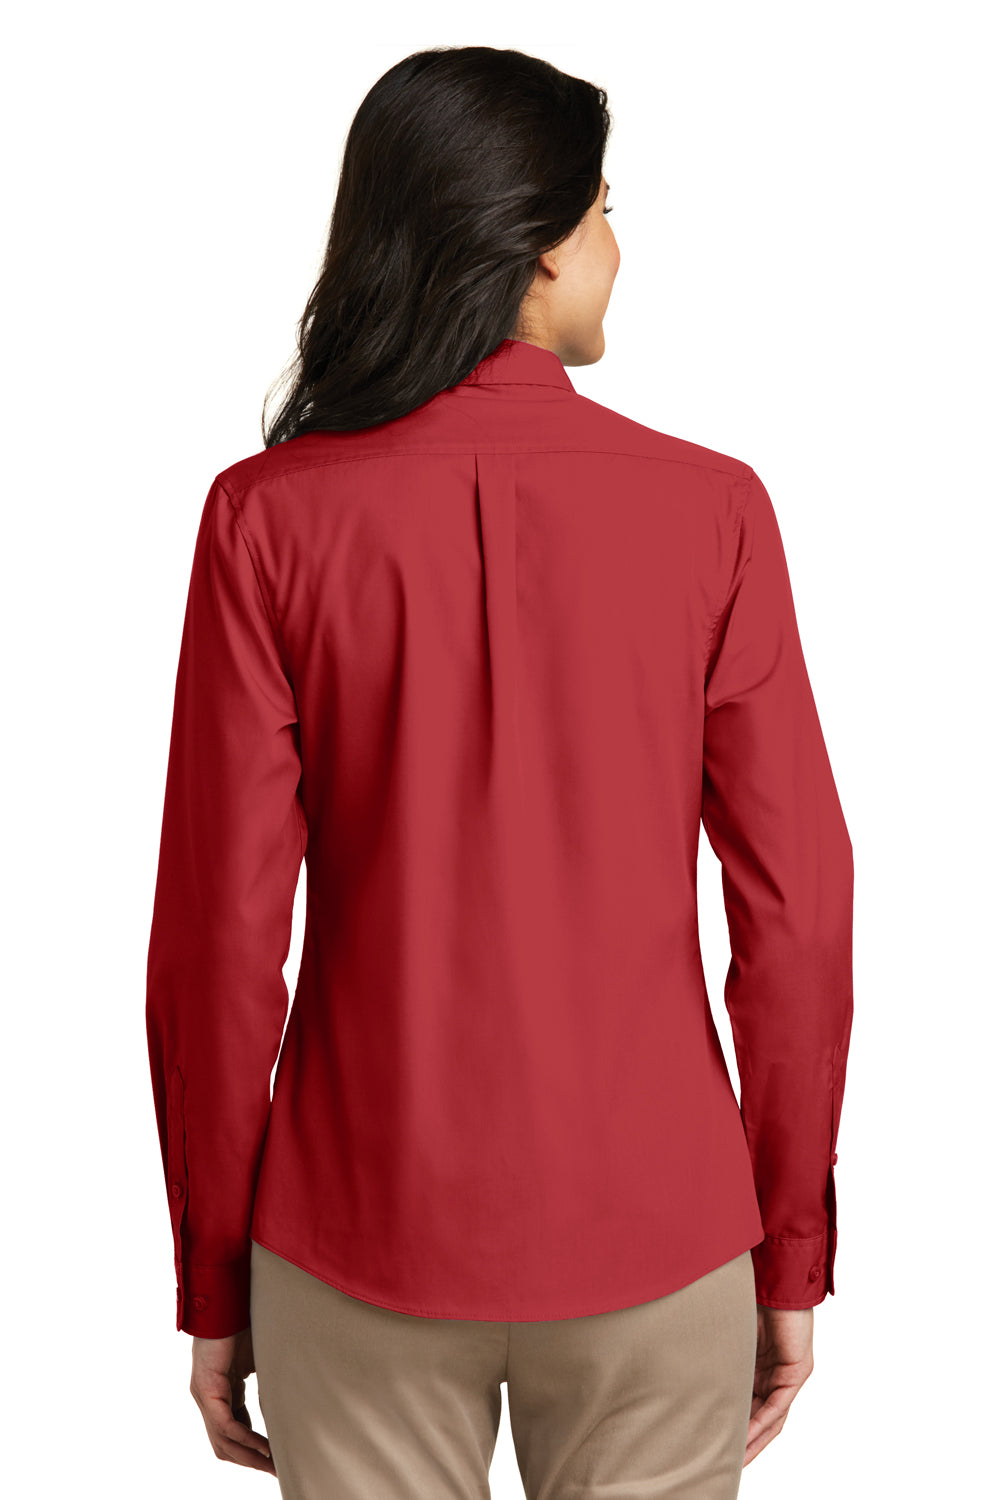 Port Authority LW100 Womens Carefree Stain Resistant Long Sleeve Button Down Shirt Rich Red Back